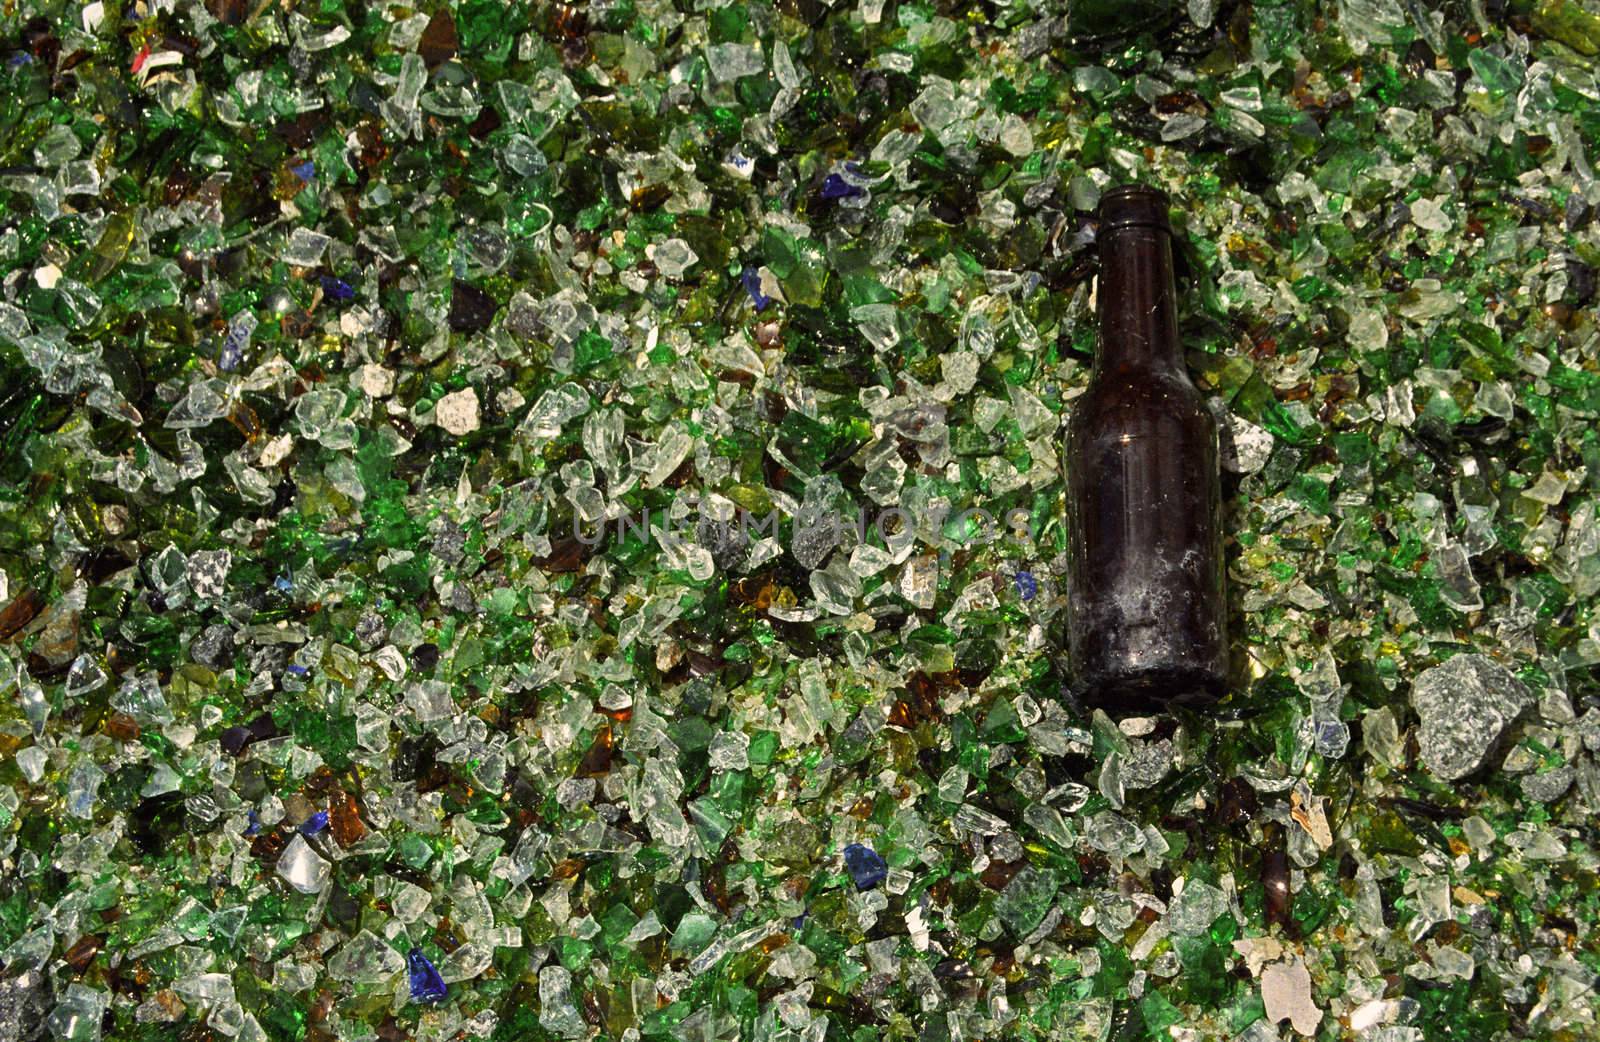 Bottle on a Bed of Crushed Glass by pjhpix